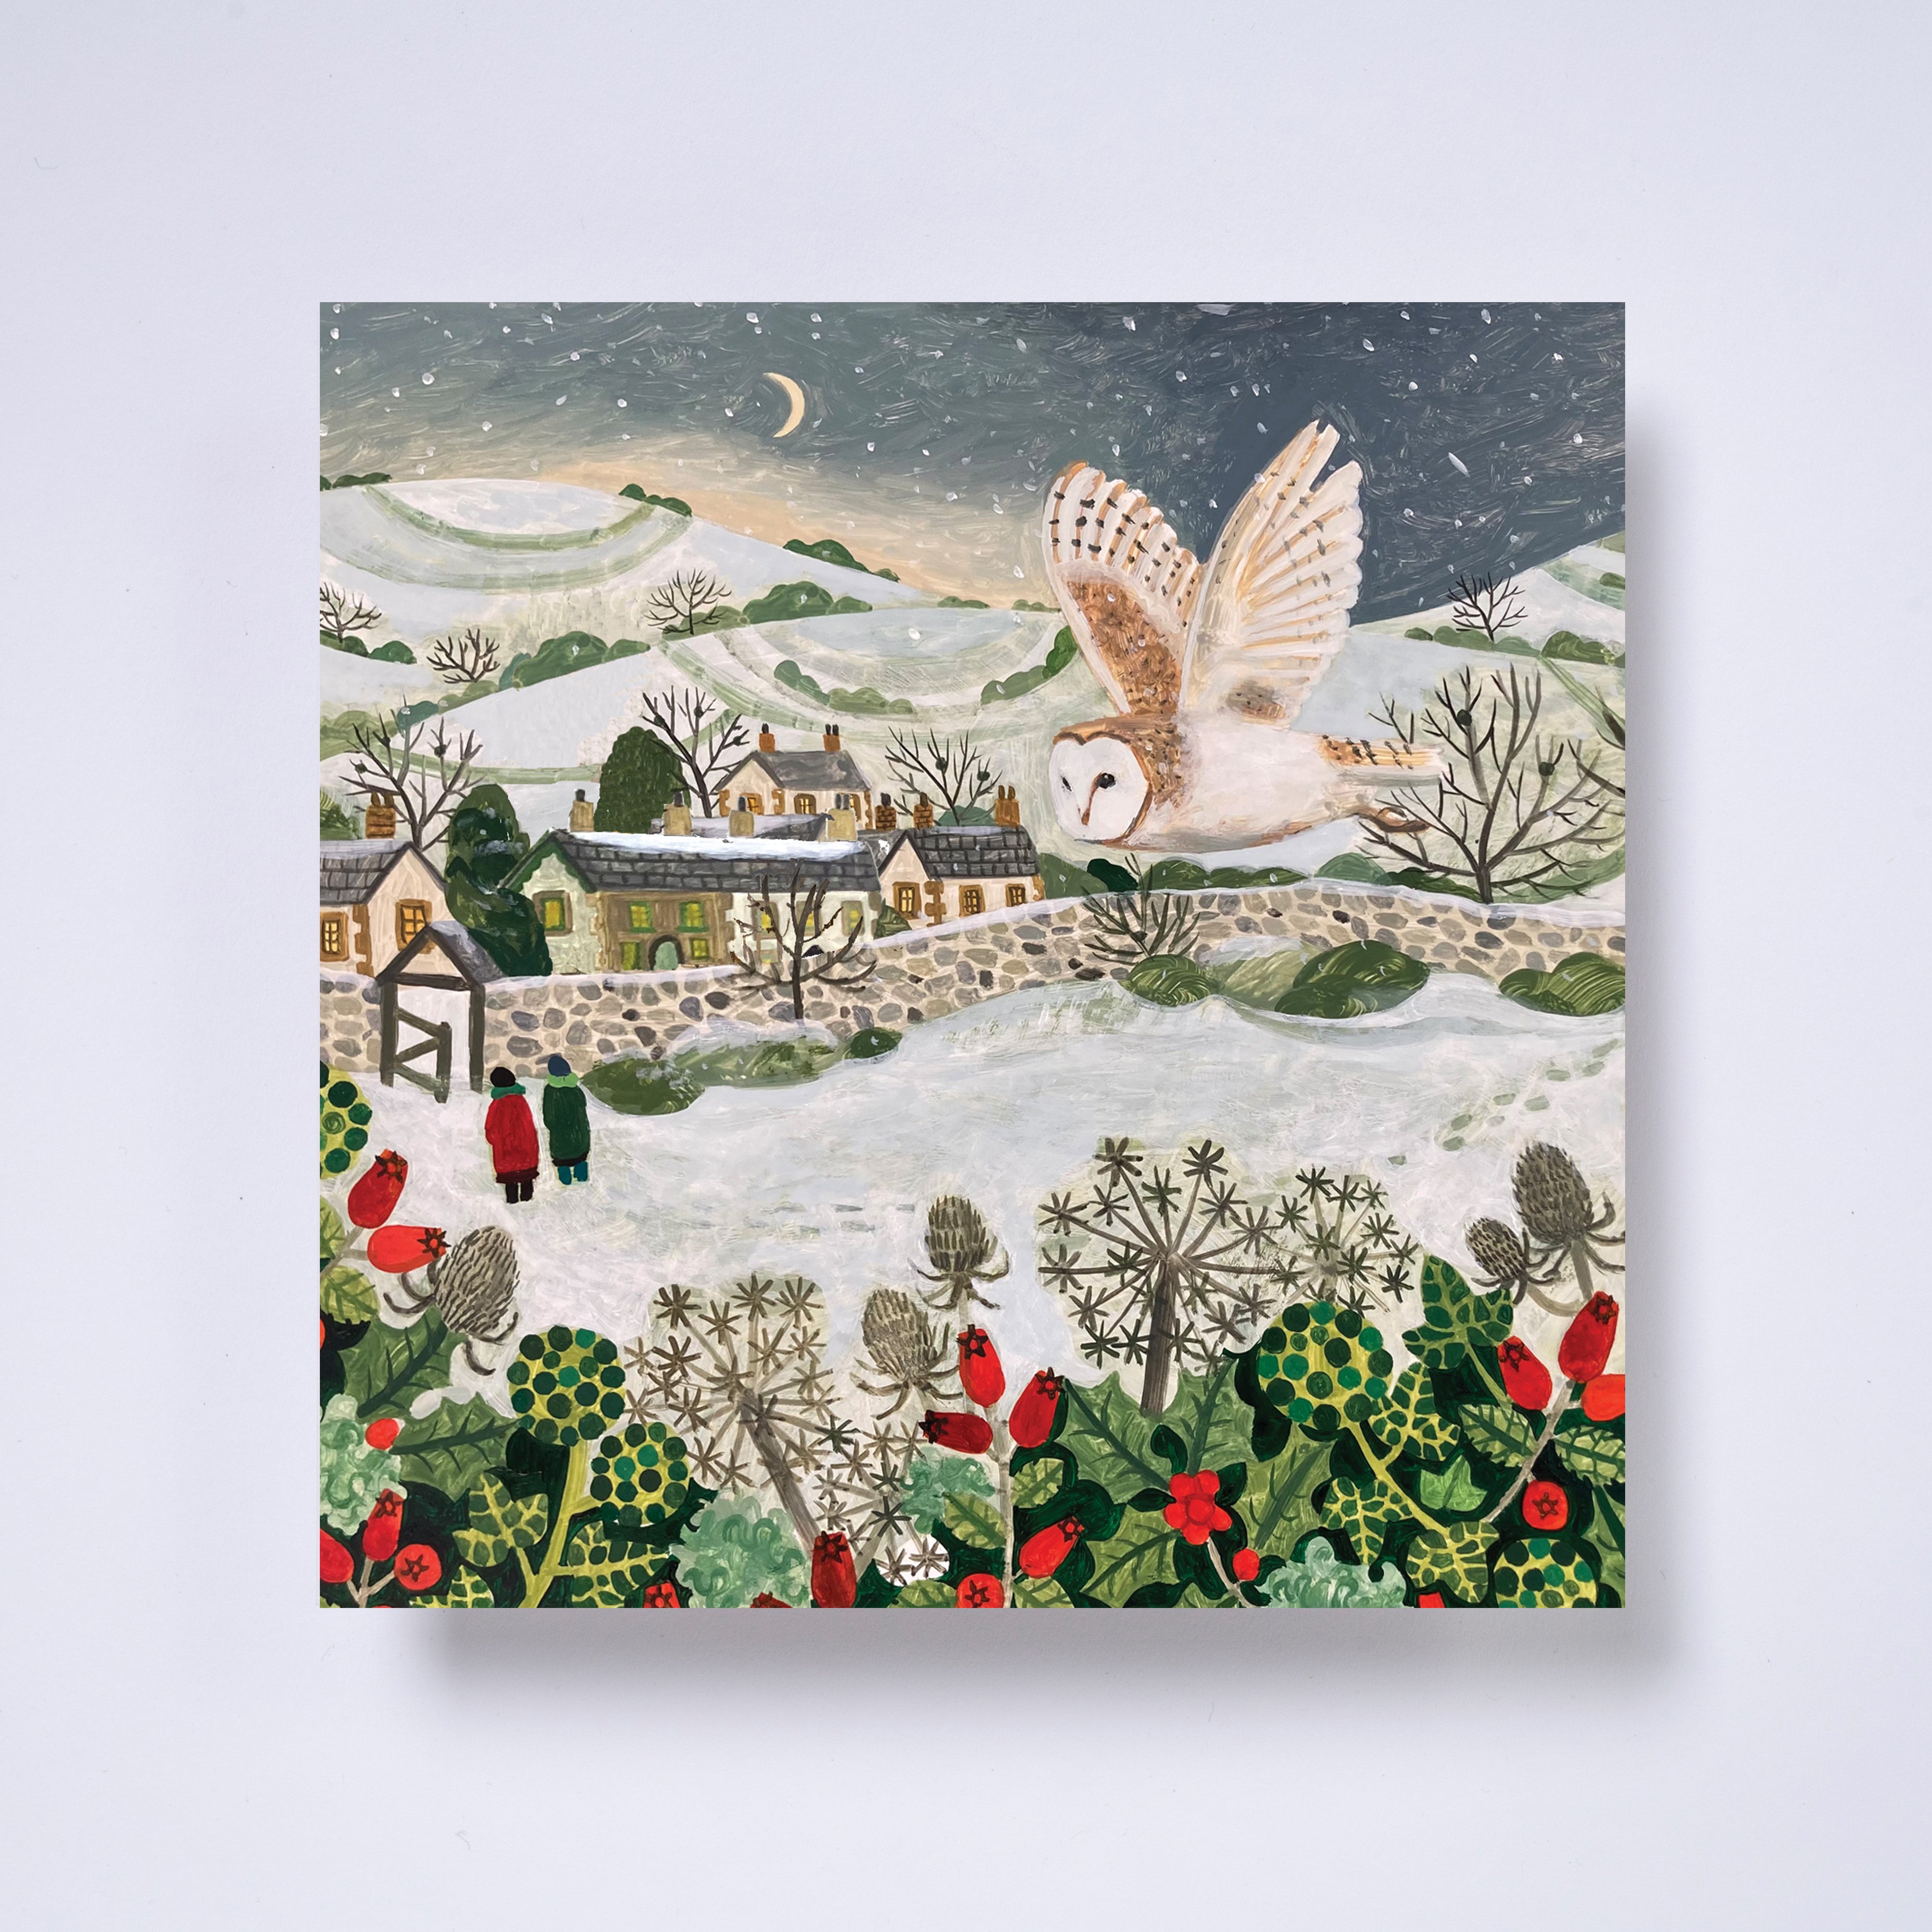 Owl and fields - pack of 10 charity Christmas cards with envelopes